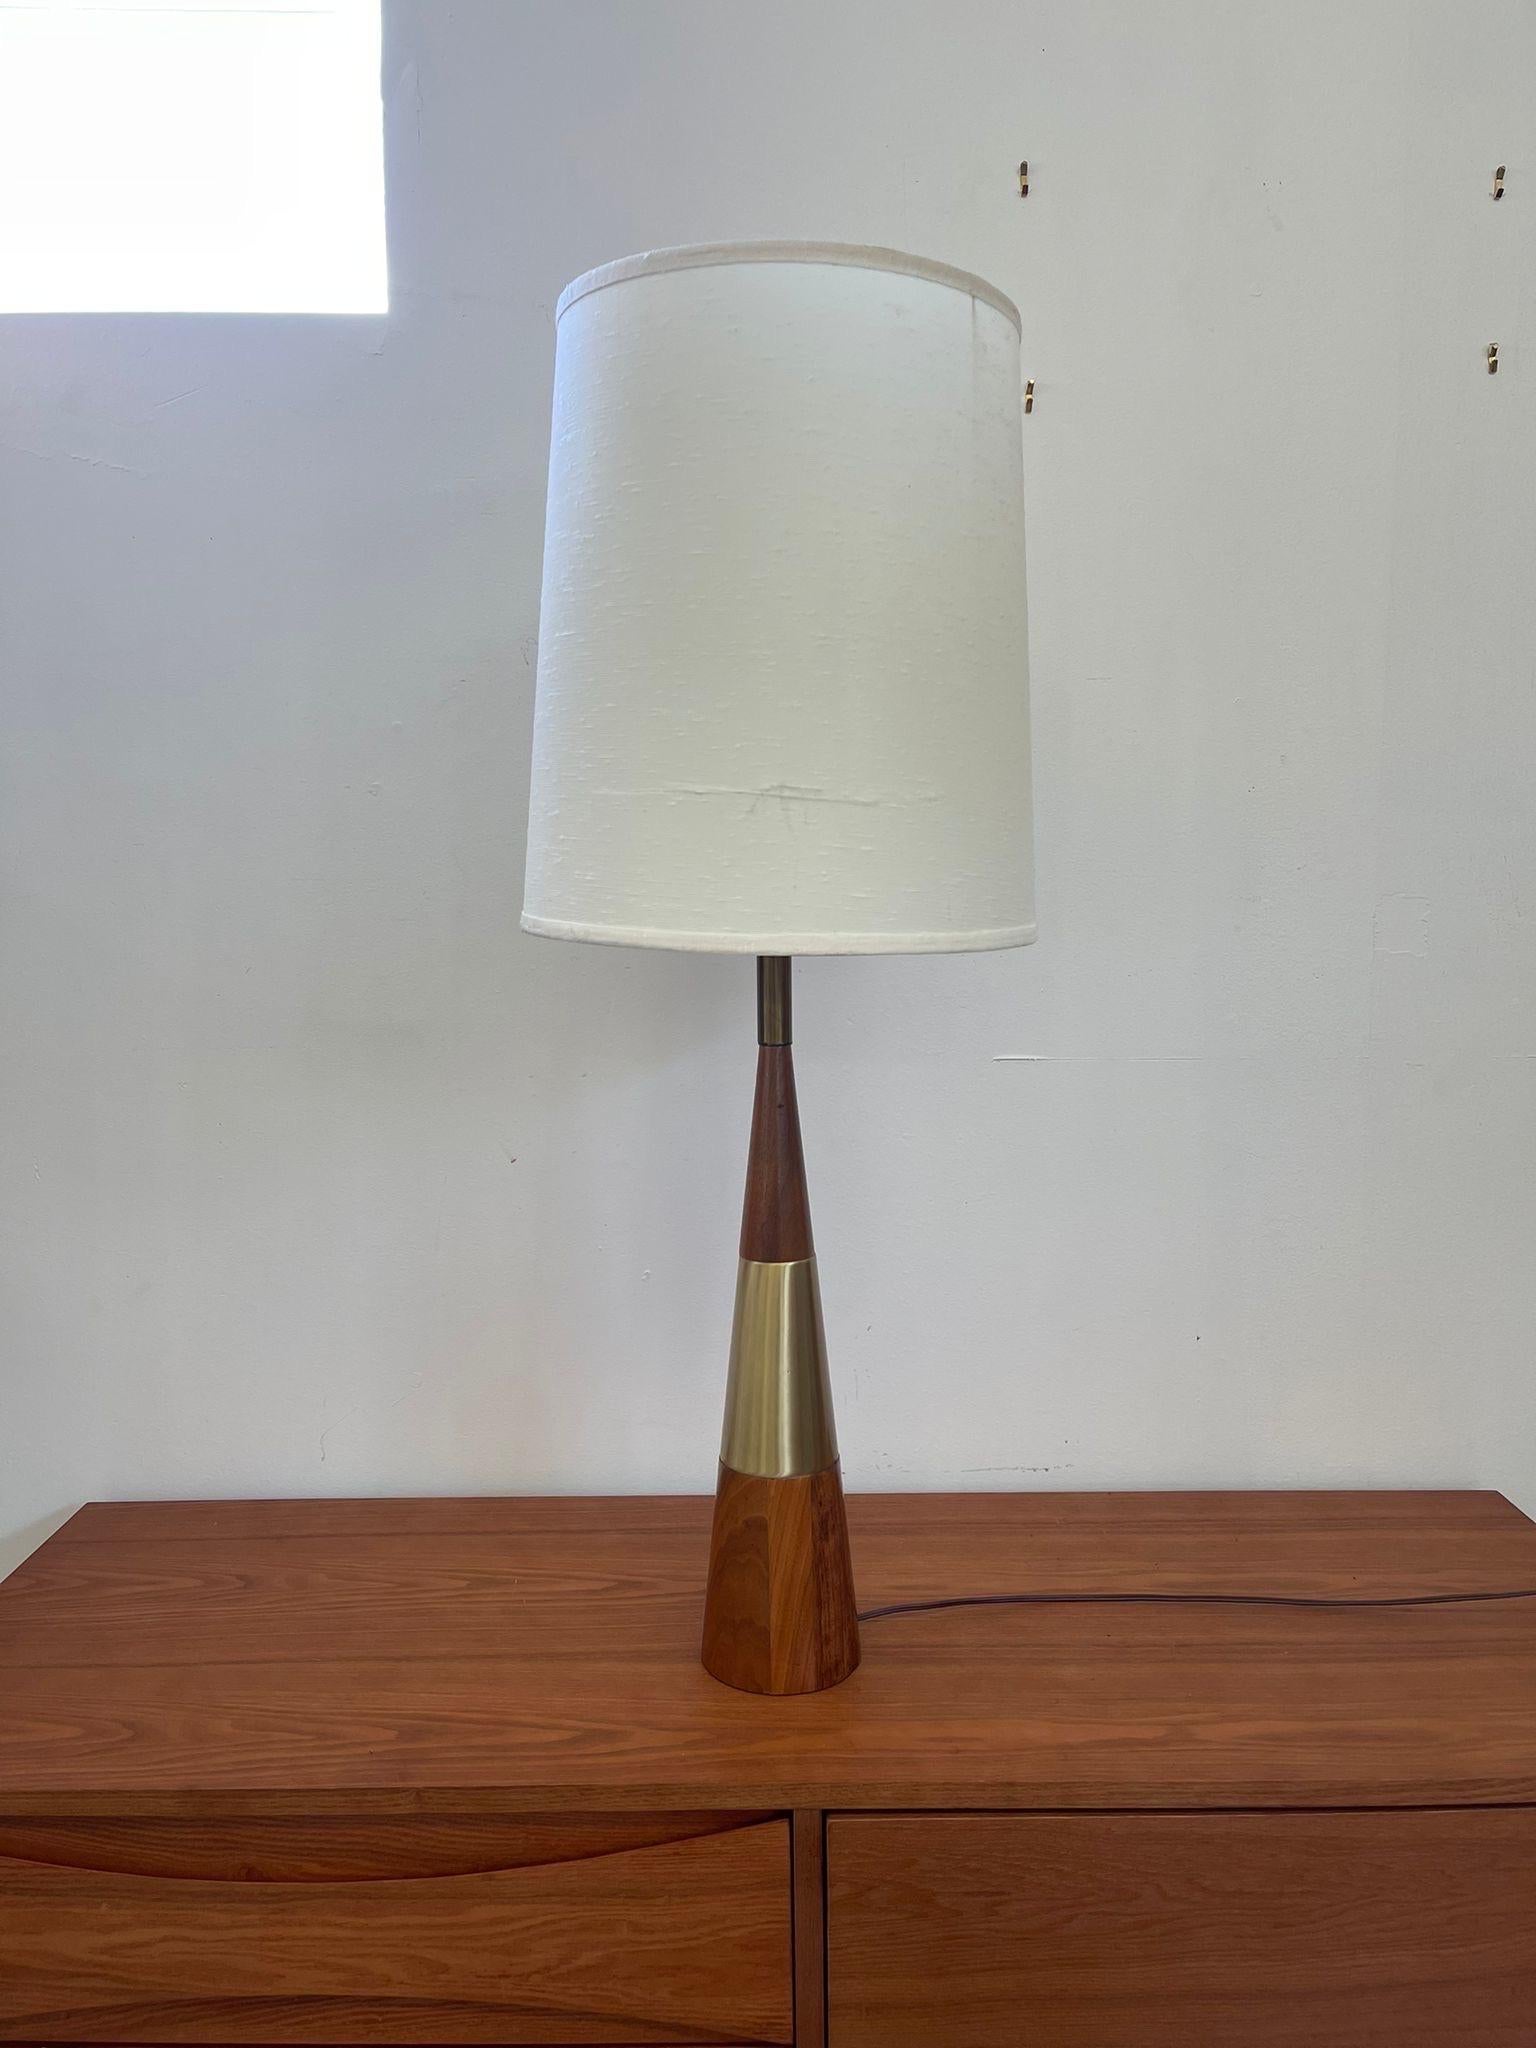 Fully Functional Cone Shaped Tall Vintage Lamp. Base of the Lamp Has Brass Toned Accent and Walnut Toned Wood. Possibly 1950s. Vintage Condition Consistent with Age as Pictured. Light Bulb not Included.

Dimensions. Base 5 ; Diameter ; 37 H

       